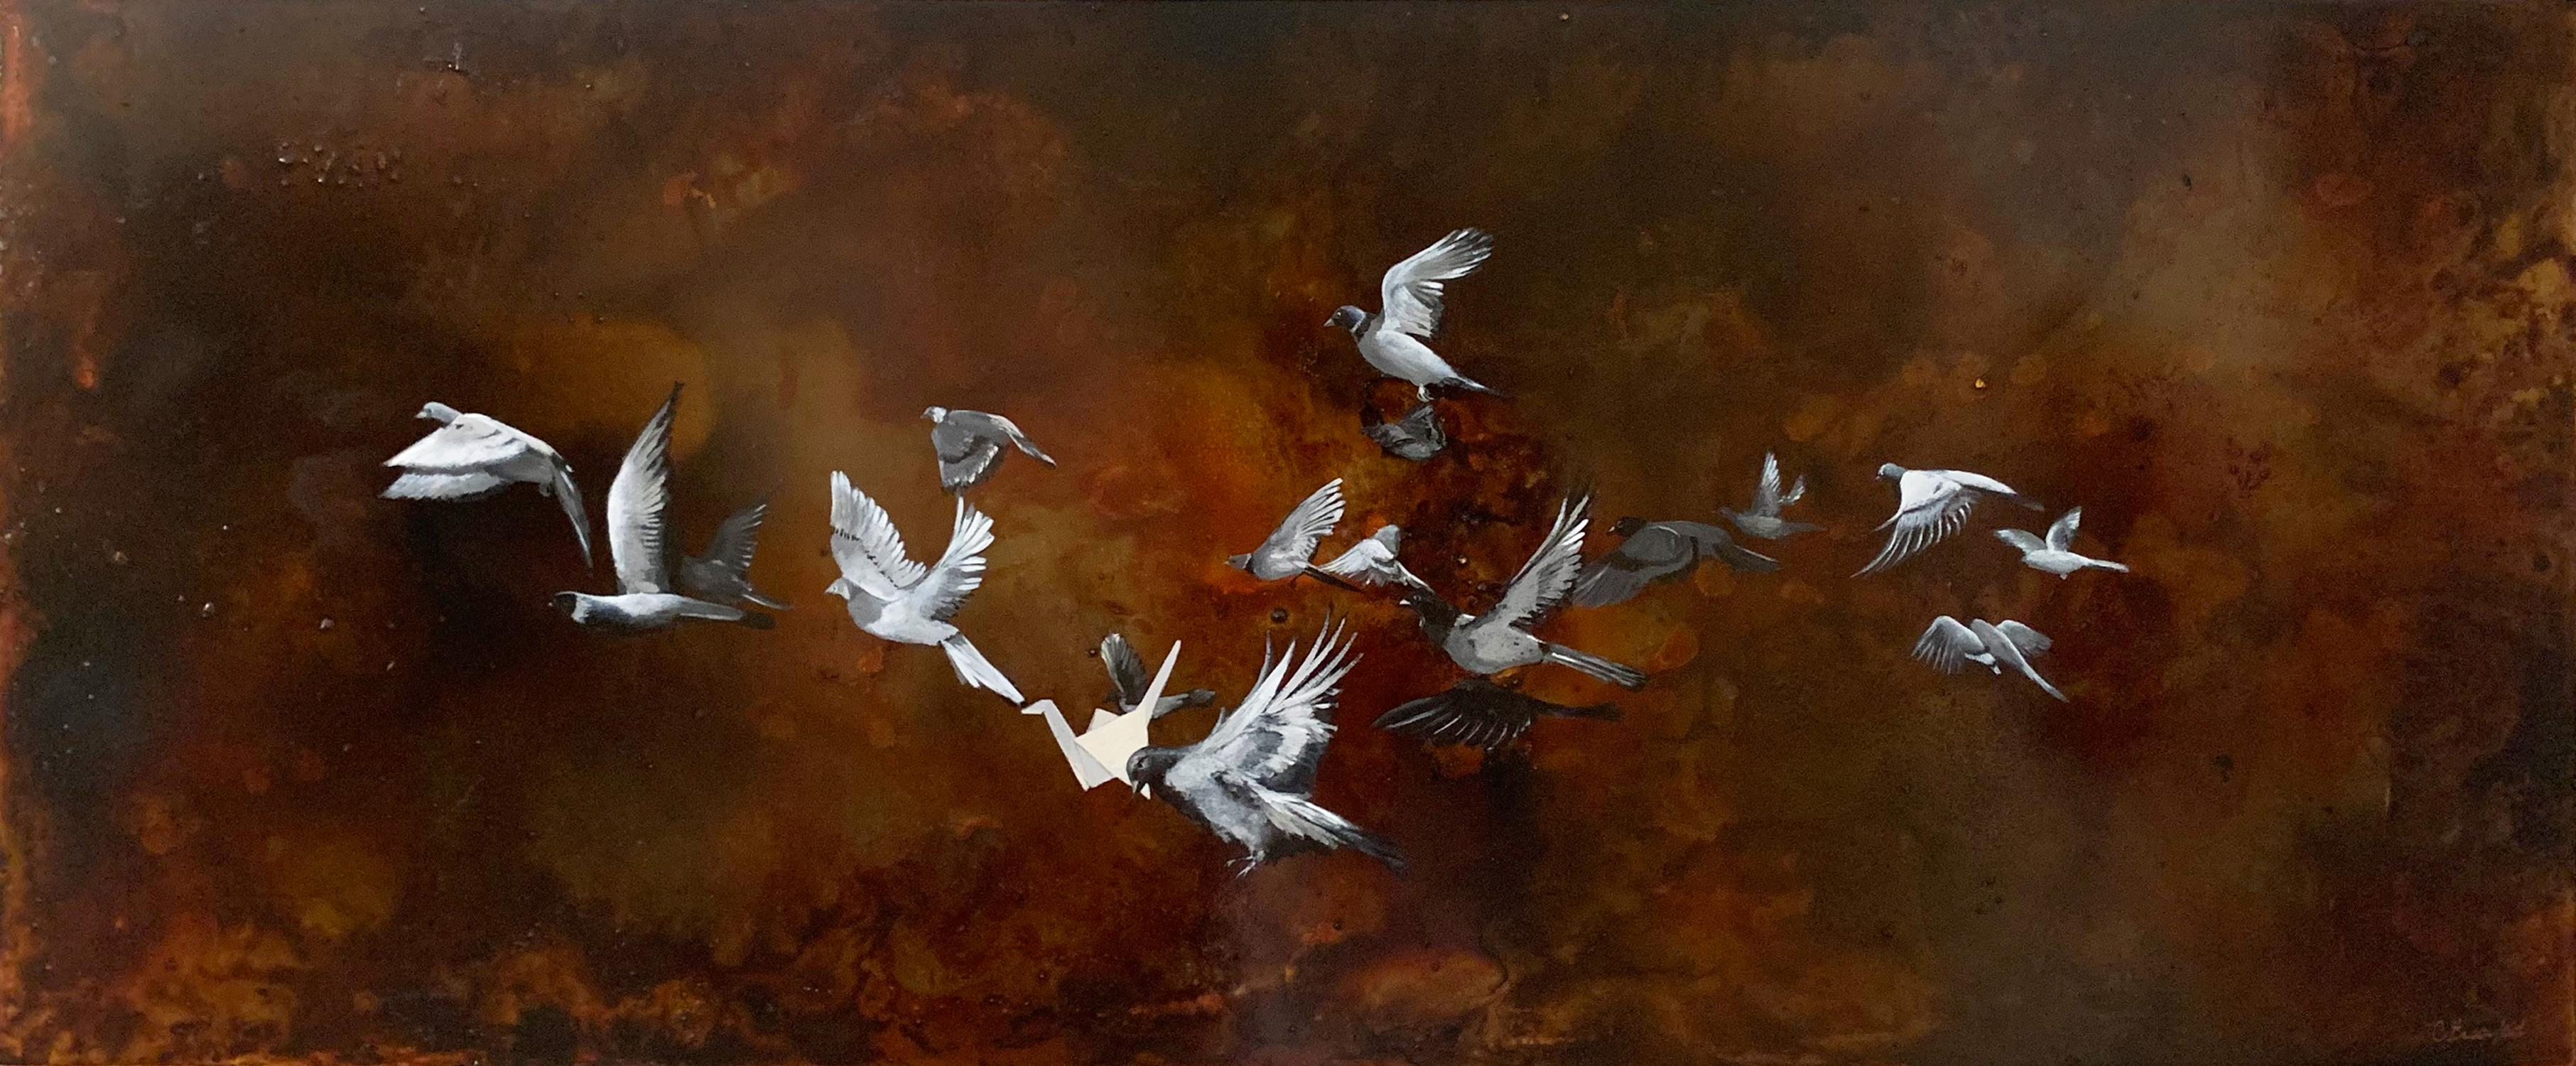 This Is Not a Flock of Birds, Original Painting - Art by Candice Eisenfeld